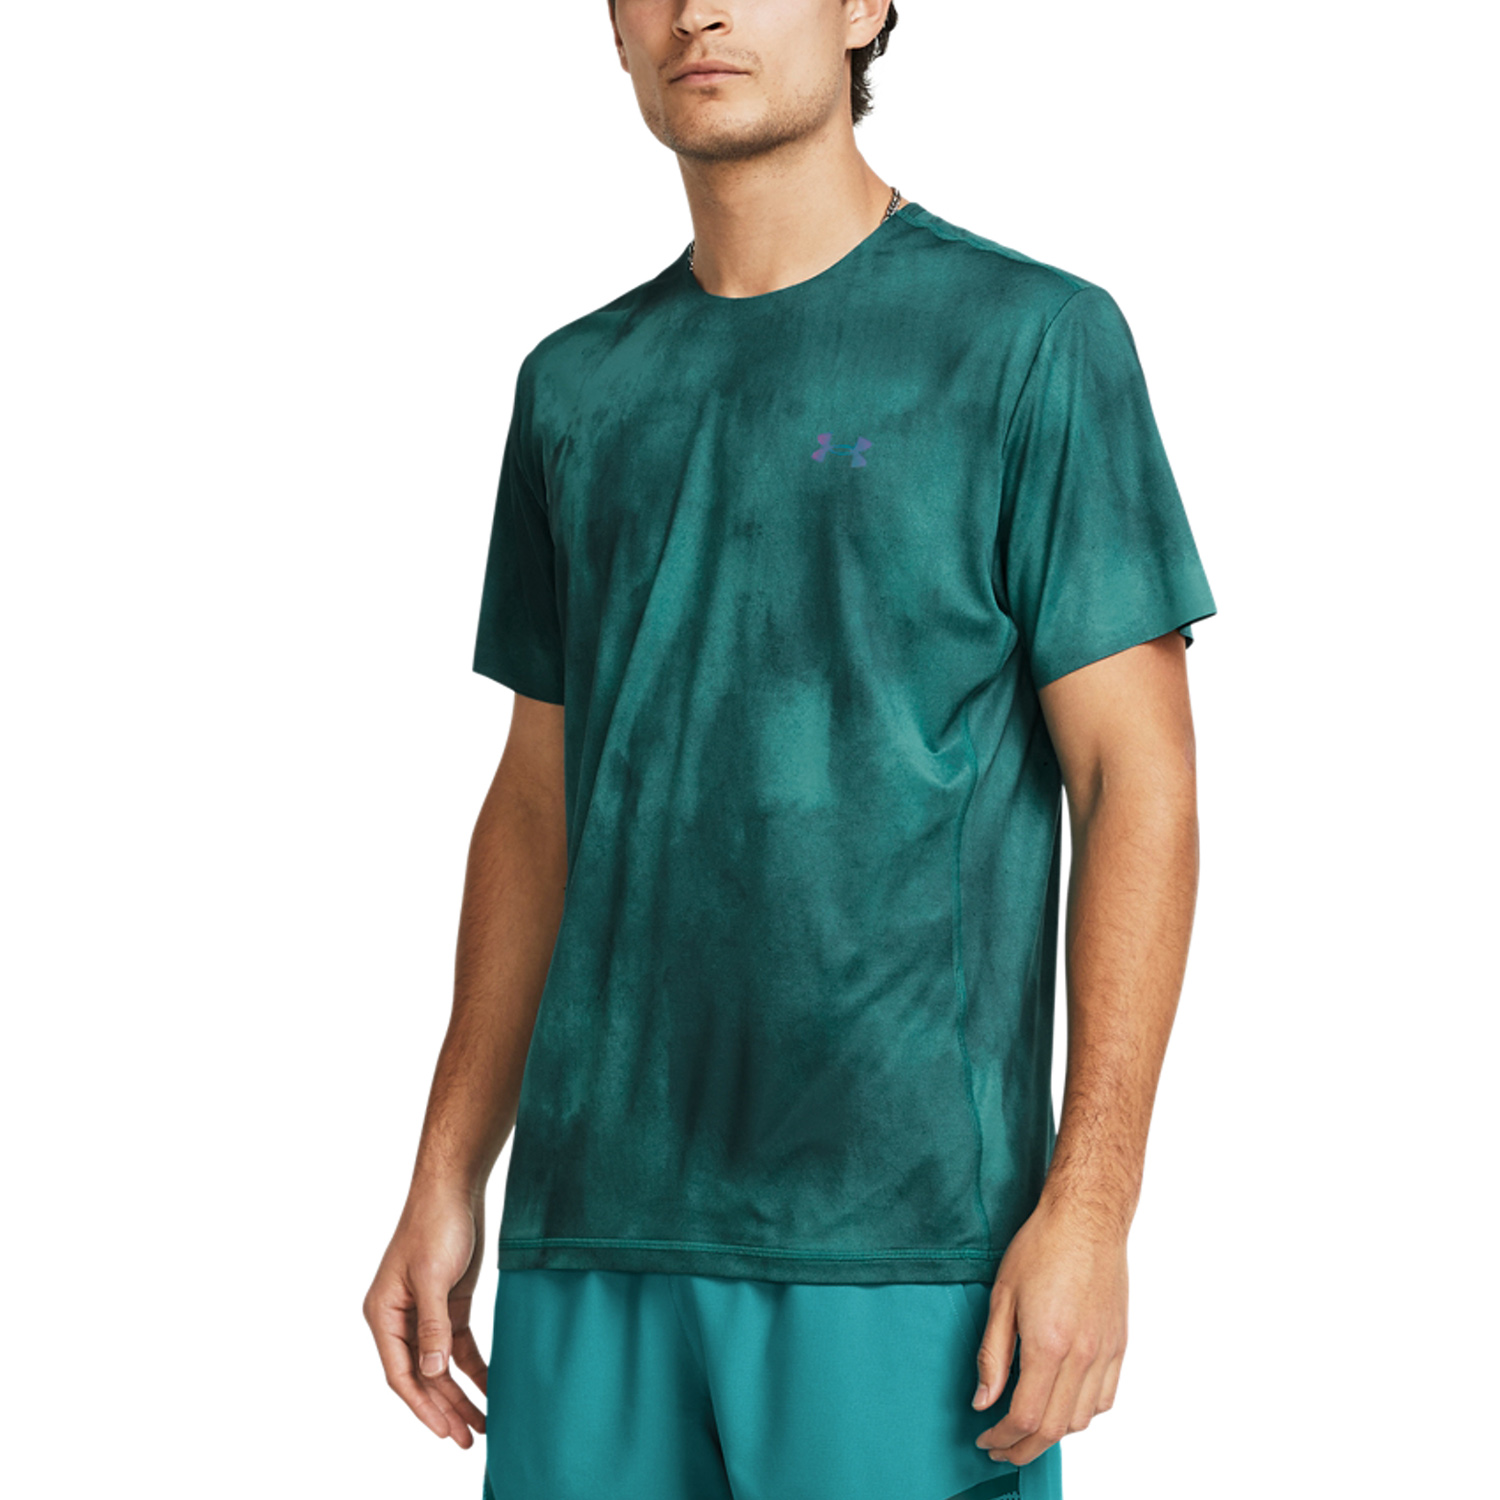 Under Armour Rush Vent Printed T-Shirt - Hydro Teal/Black